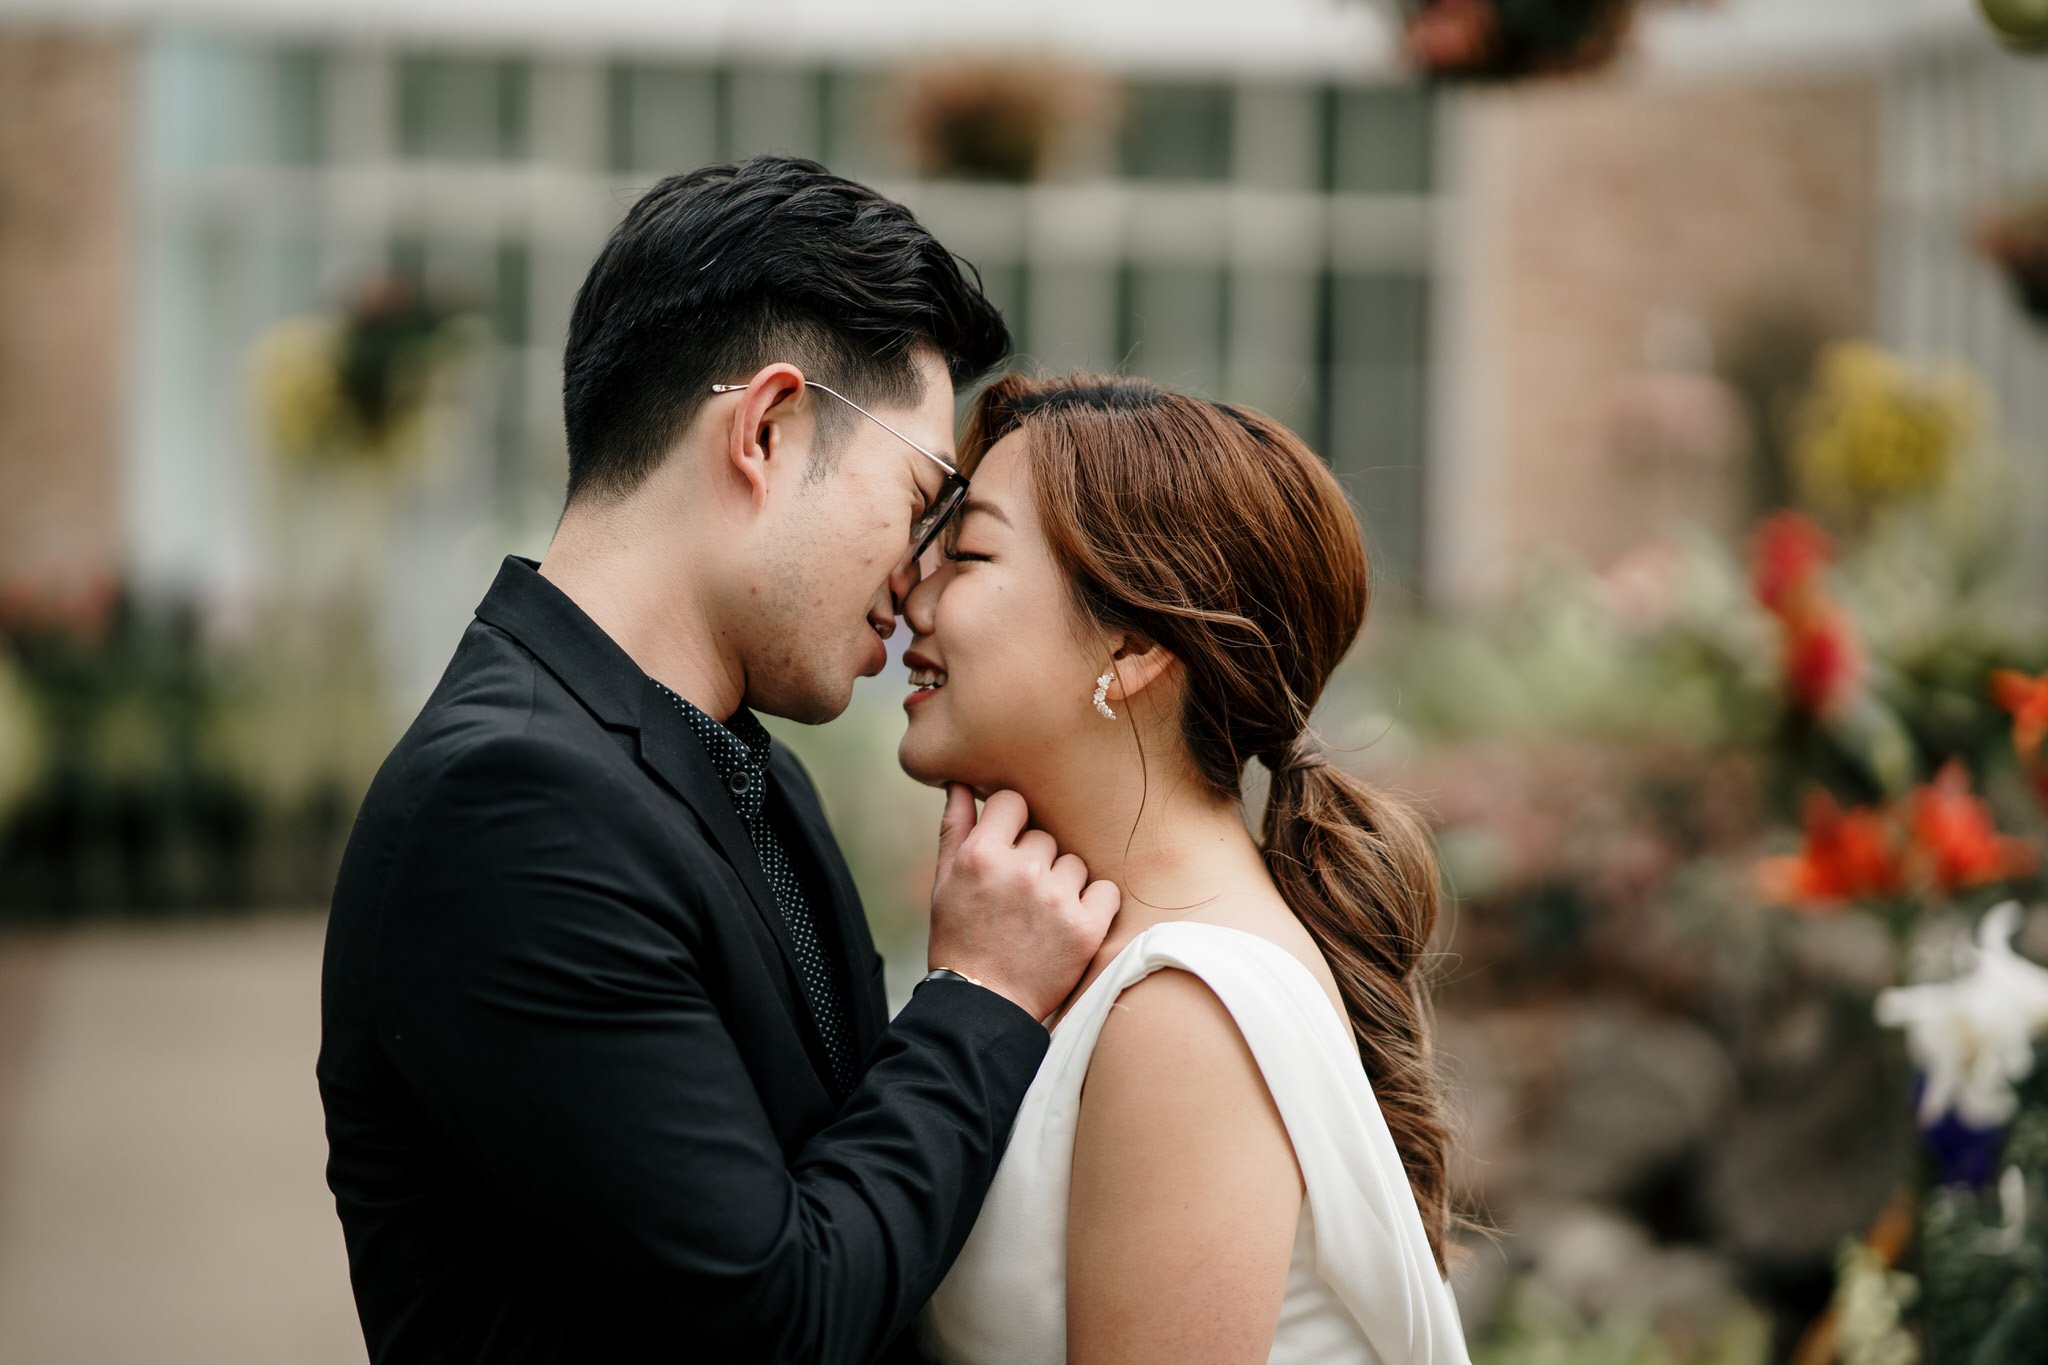 auckland-wedding-photographer-videographer-story-by-koo-koo's-jewelry-dear-white-productions-pre-wedding-engagement-photo-glass-house-botanic-fernery-garden (9).JPG